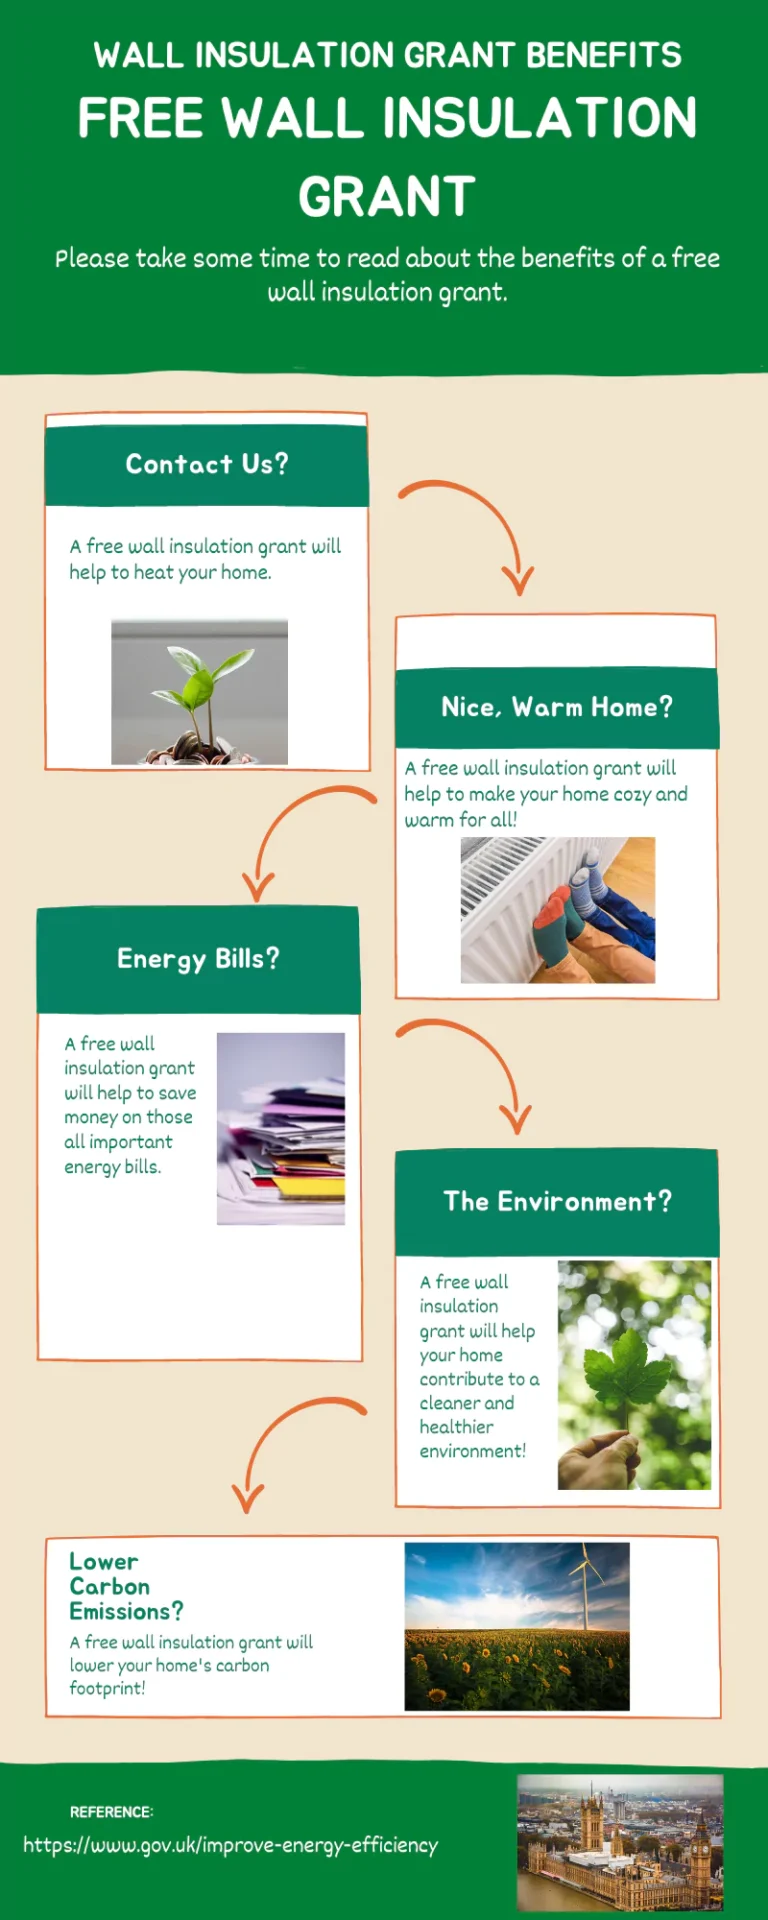 Wall Insulation Grant Benefits infographic